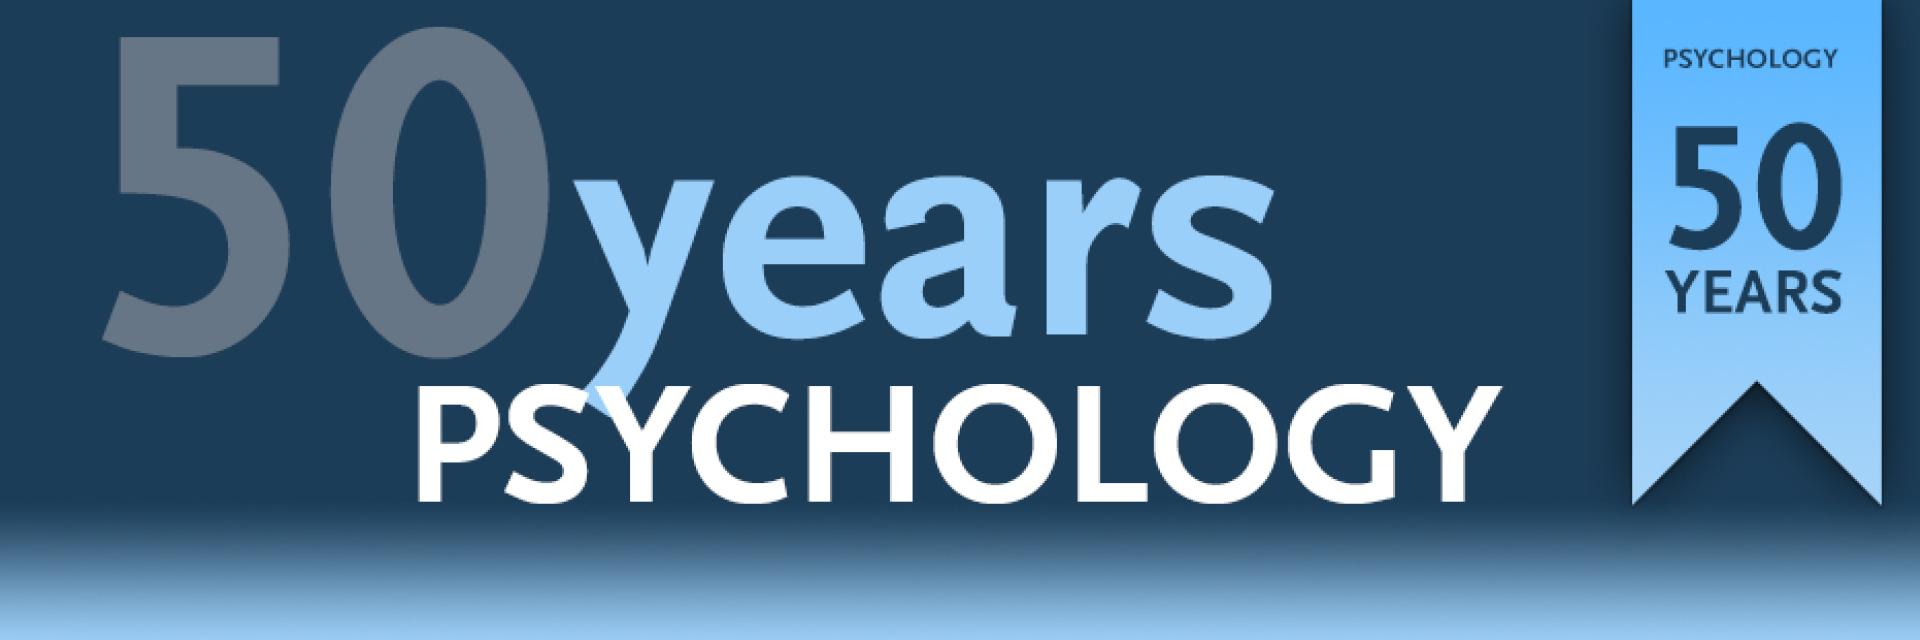 50 years of psychology